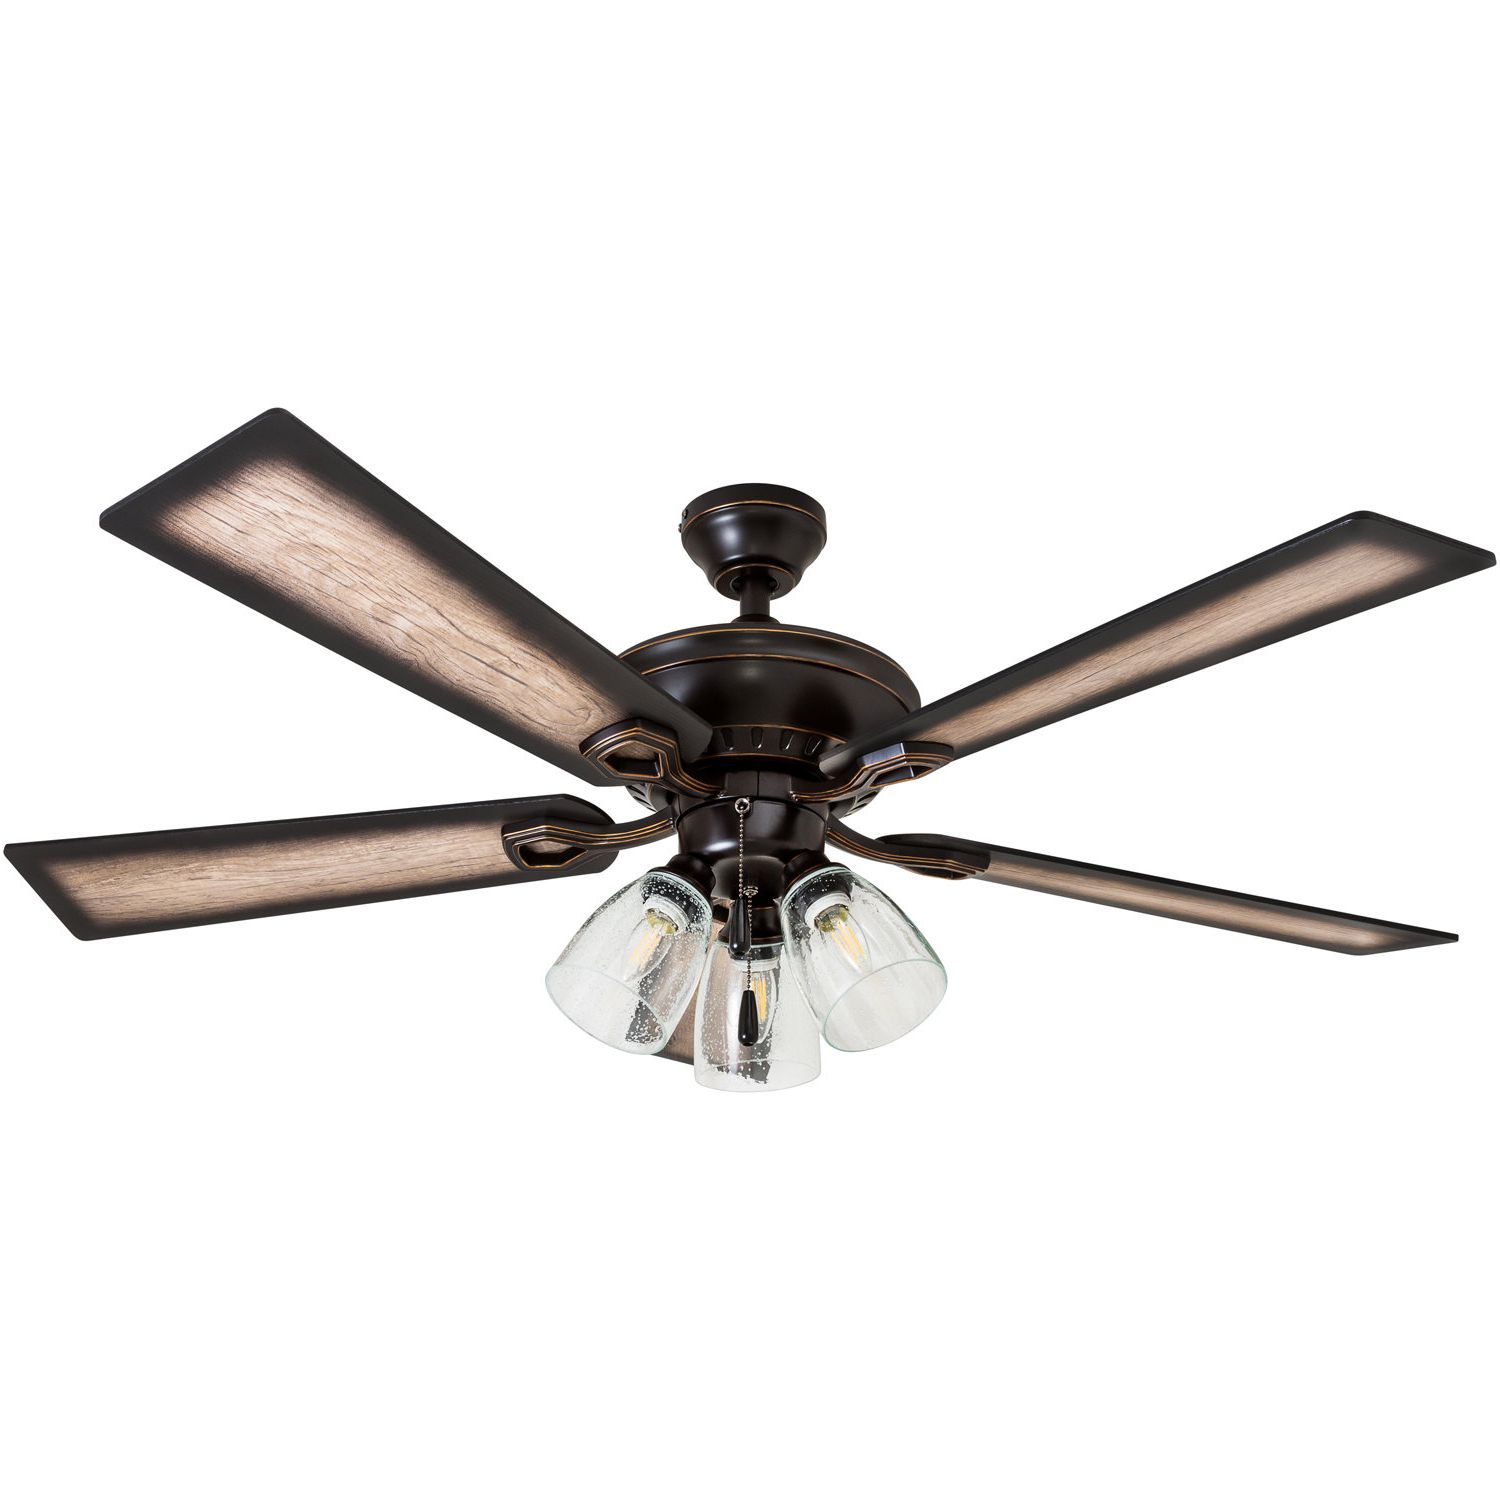 52" O'hanlon 5 Blade Led Ceiling Fan, Light Kit Included With Regard To Well Known Donegan 5 Blade Led Ceiling Fans (Photo 11 of 20)